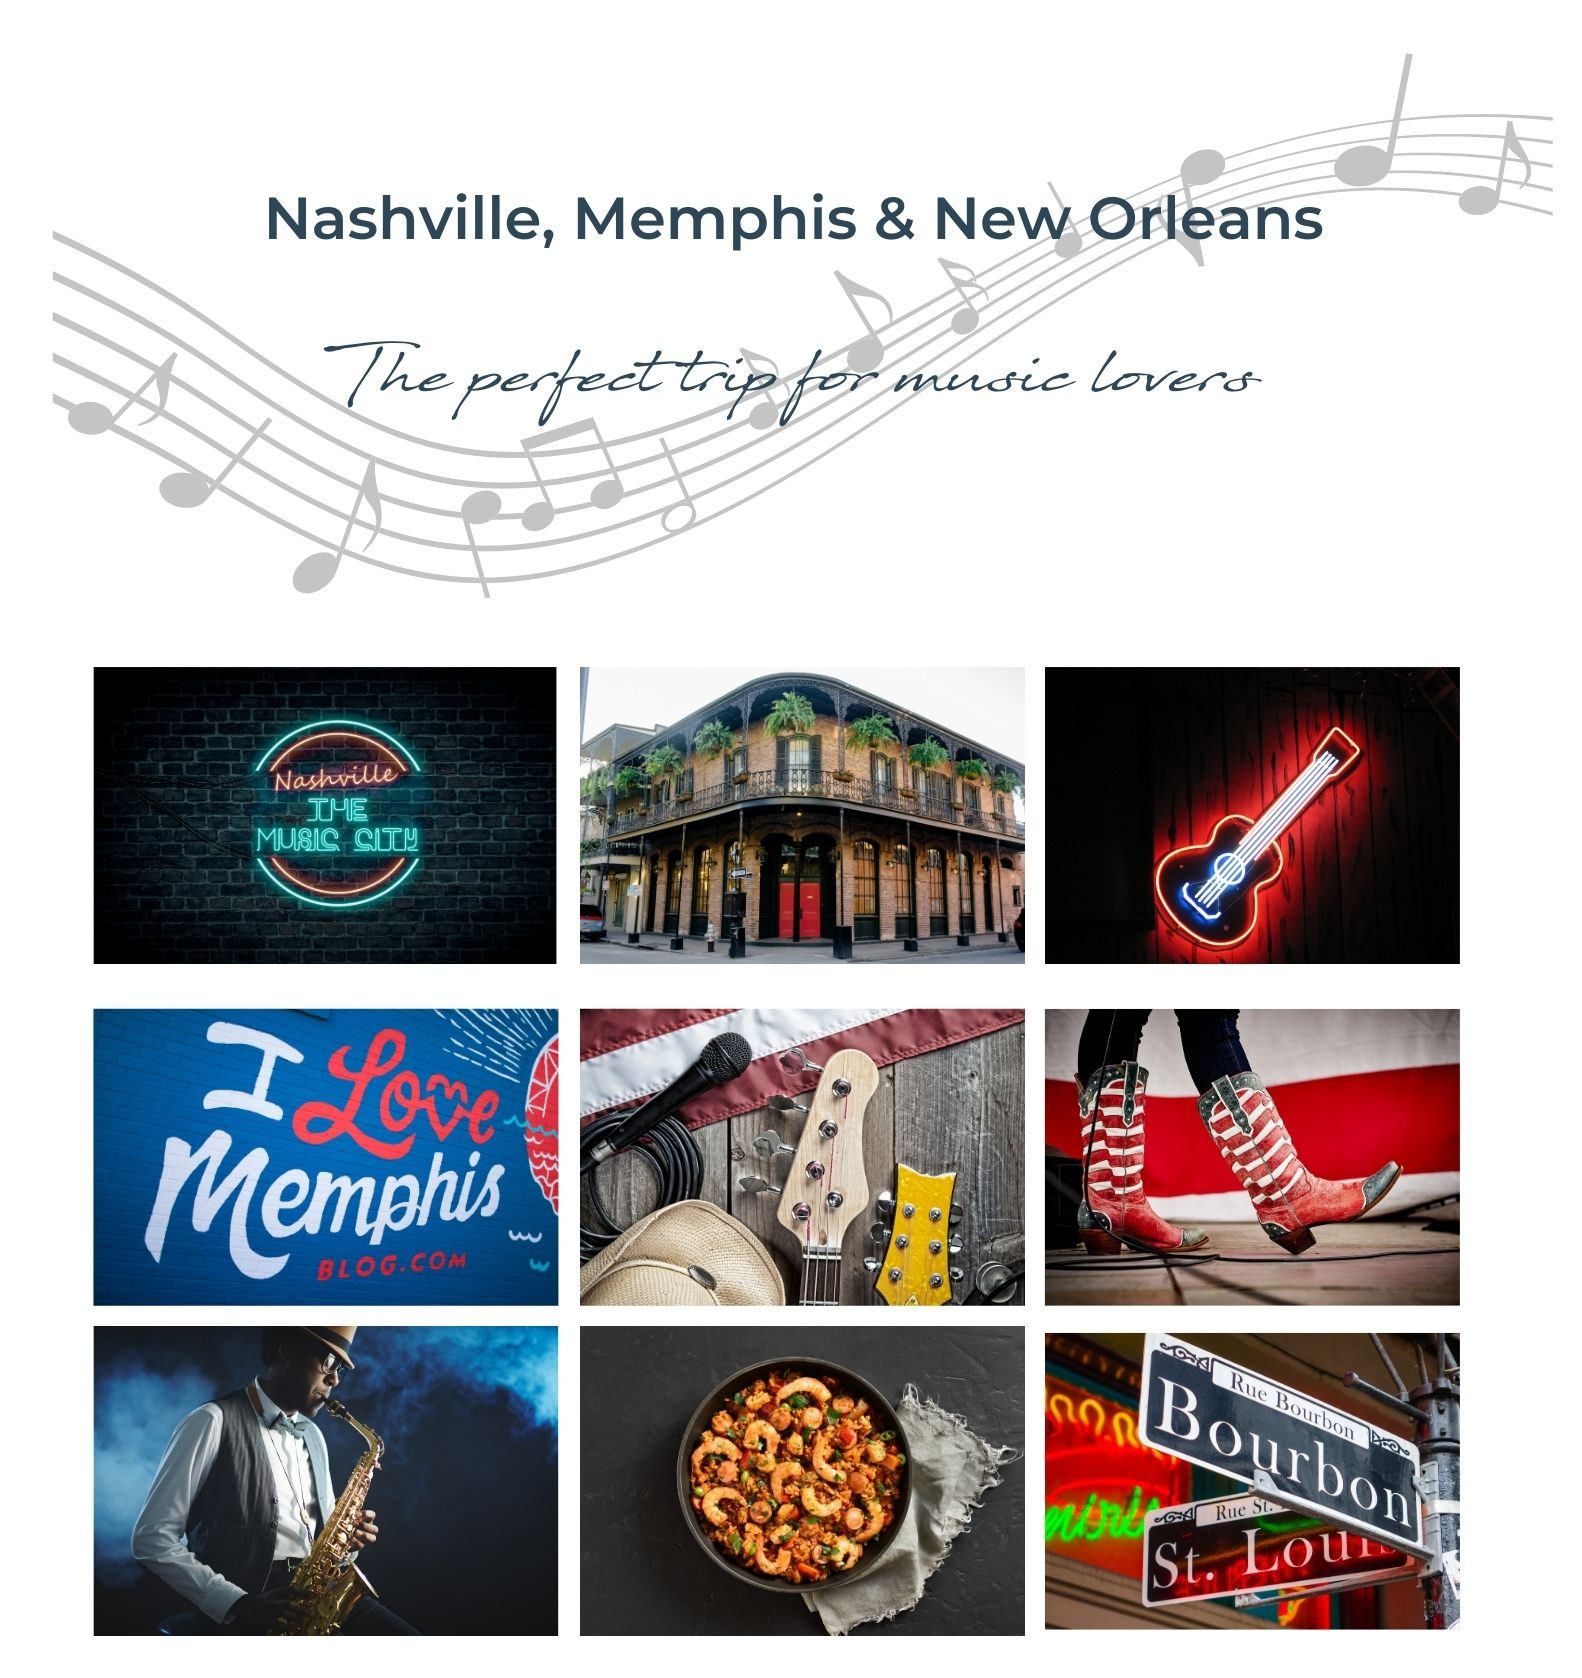 Nashville, Memphis & New Orleans The perfect trip for music lovers web page